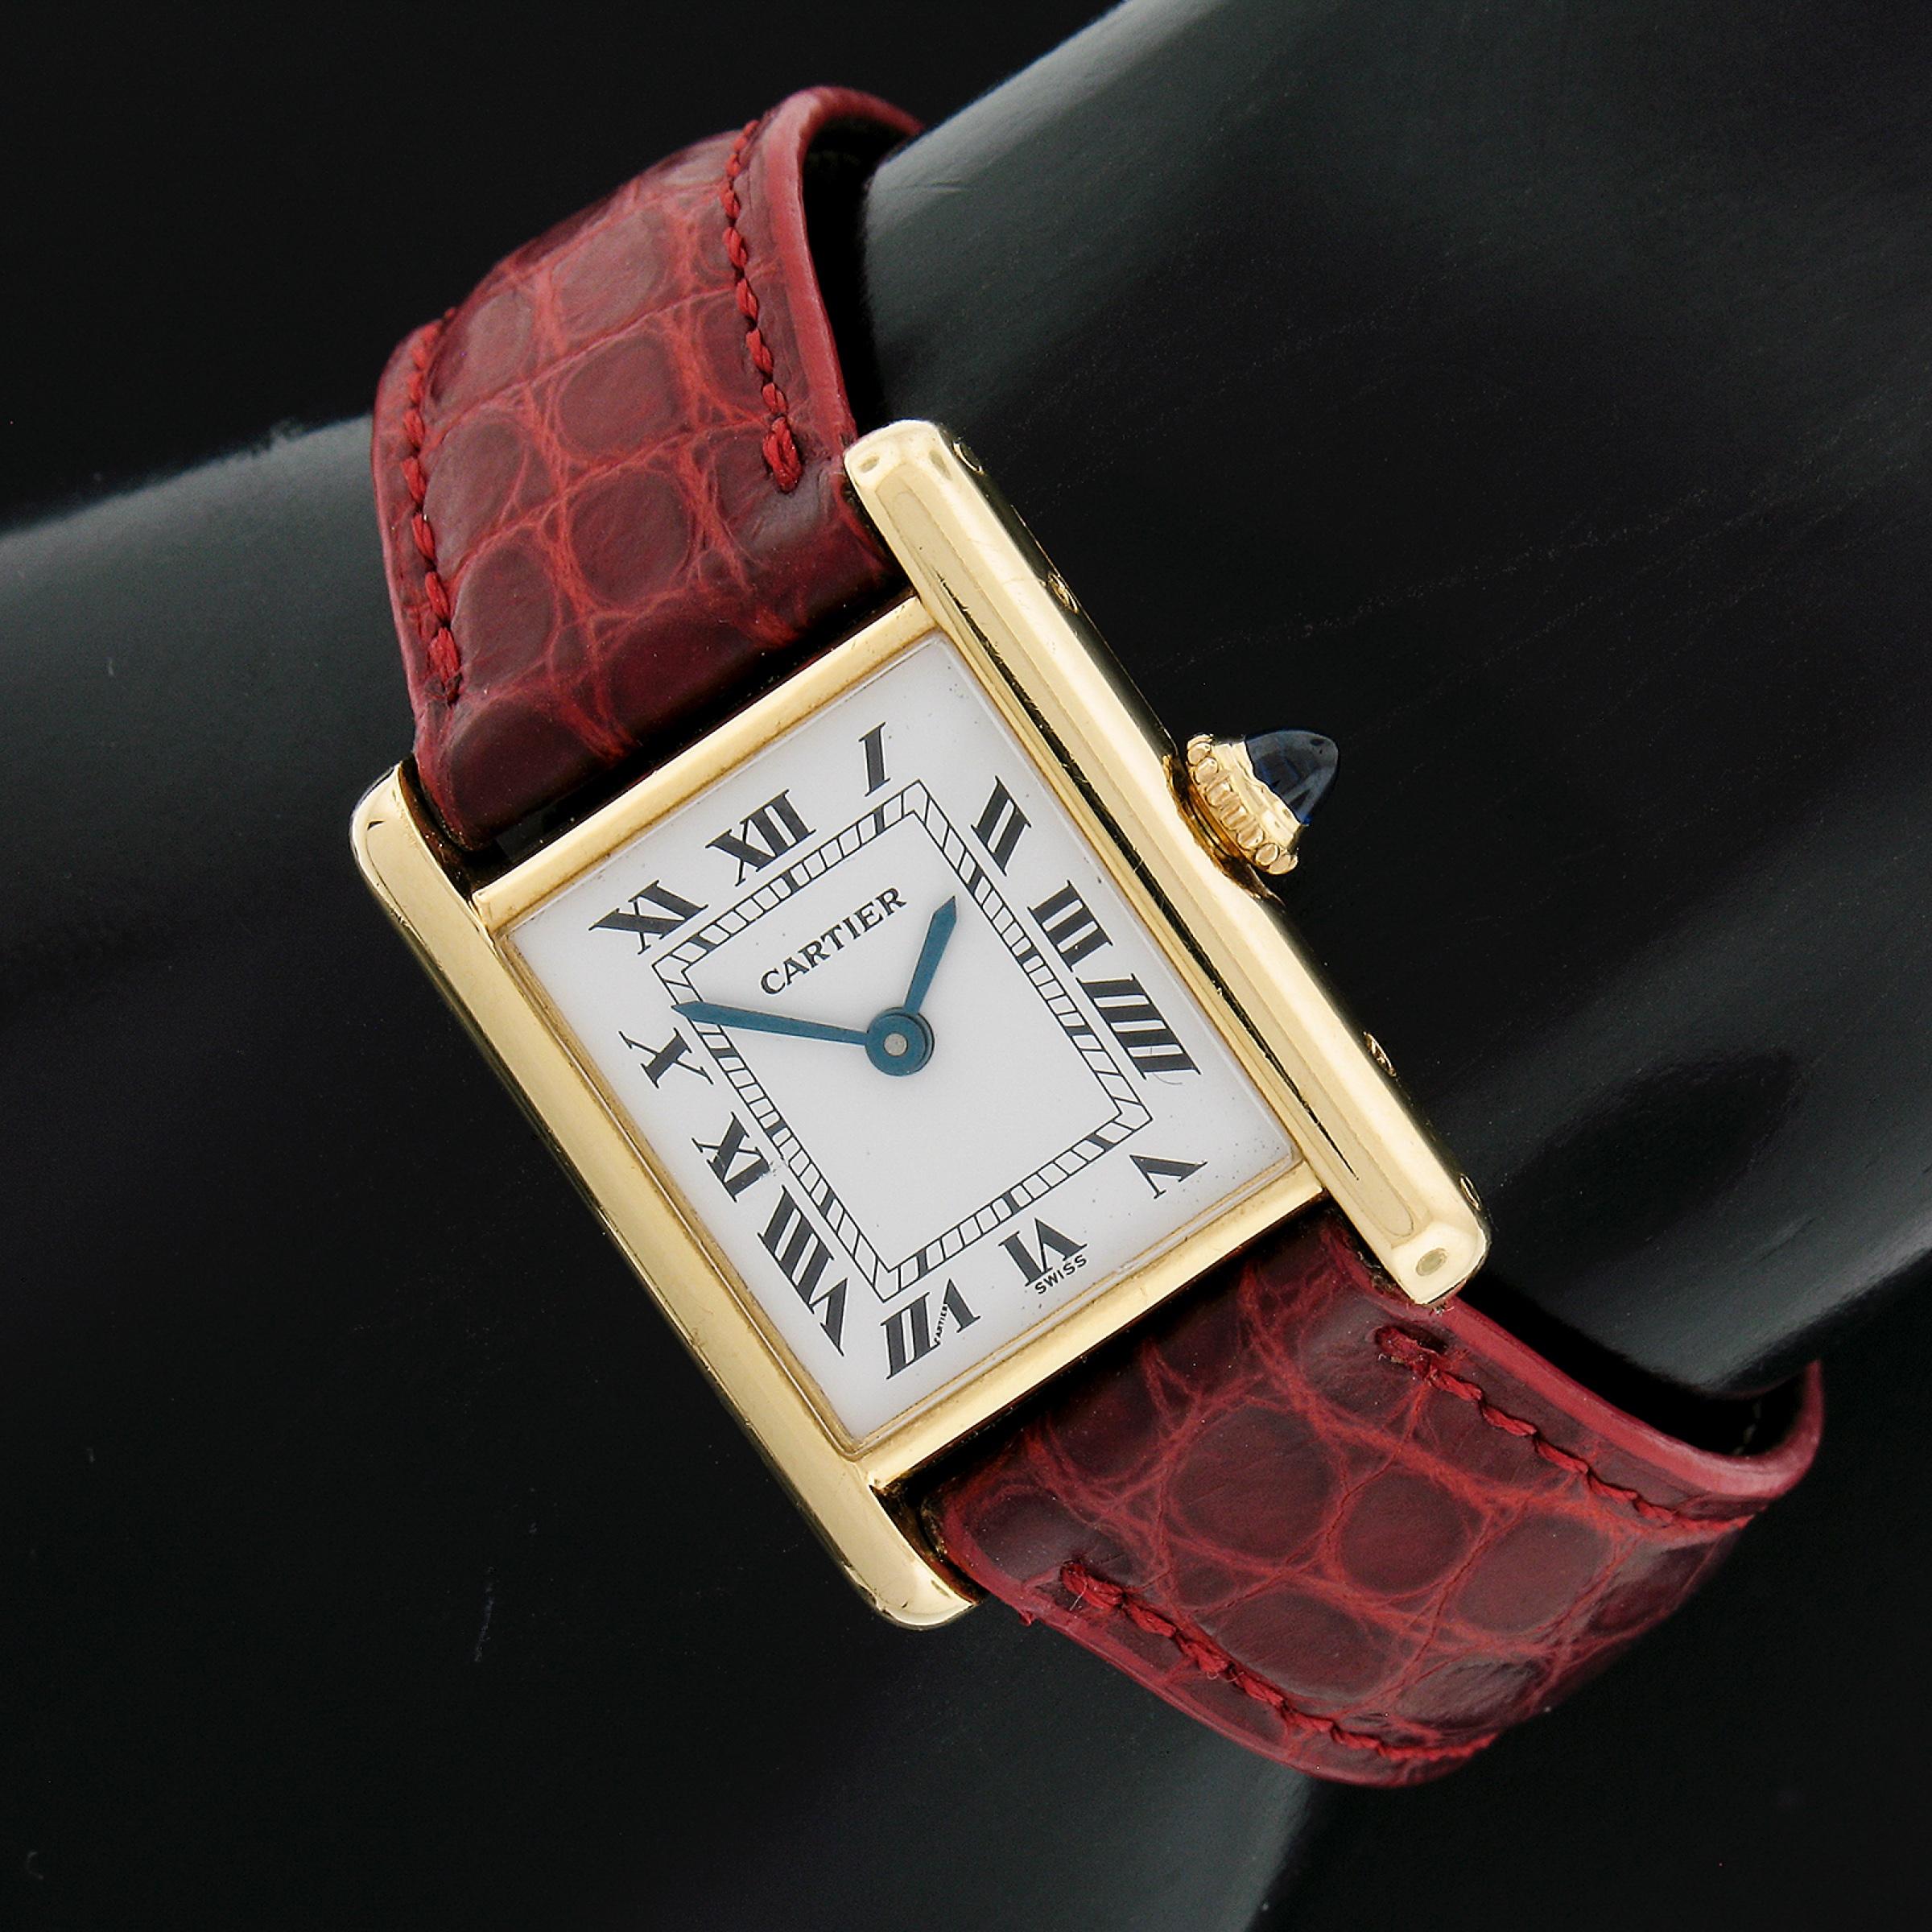 This beautiful classic vintage Cartier Tank watch features a mechanical hand wound Swiss movement mounted in a solid 18k yellow gold case. The watch comes with the original, genuine leather strap from Cartier as well as the original solid 18k gold